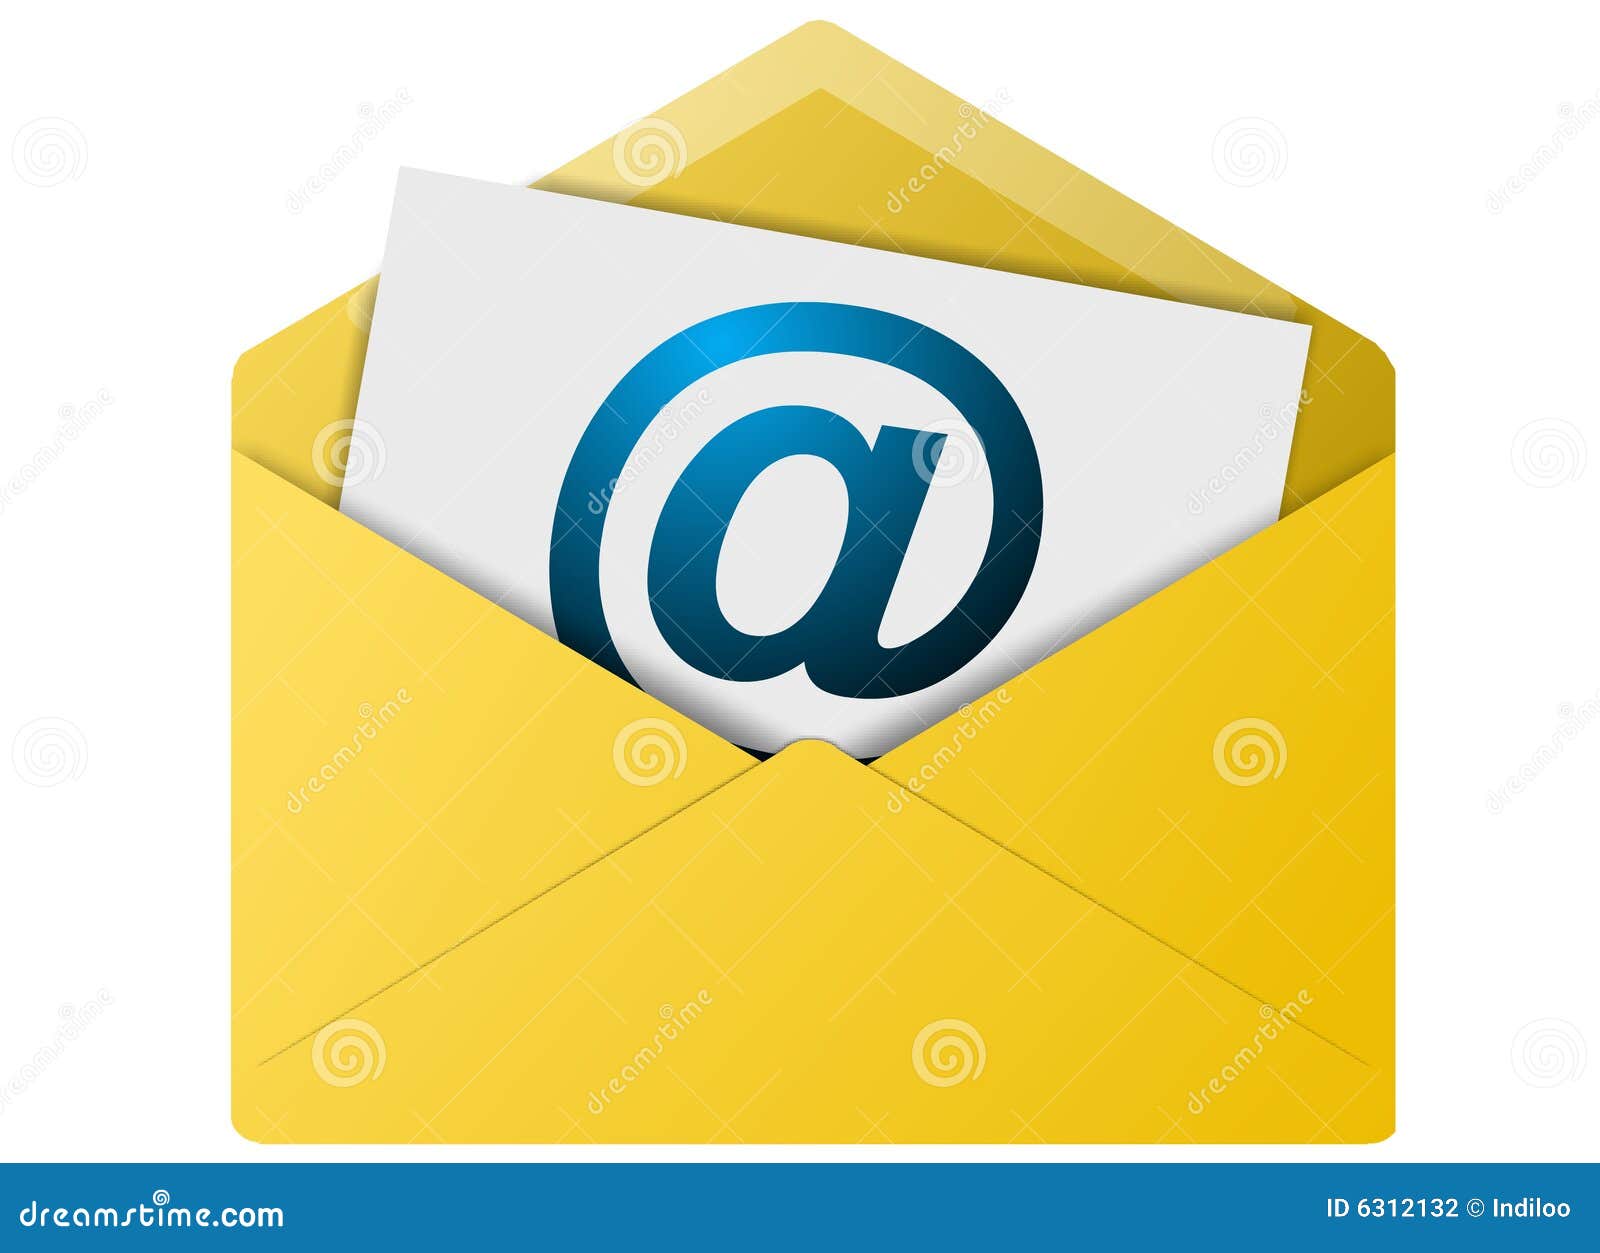 clipart email envelope - photo #27